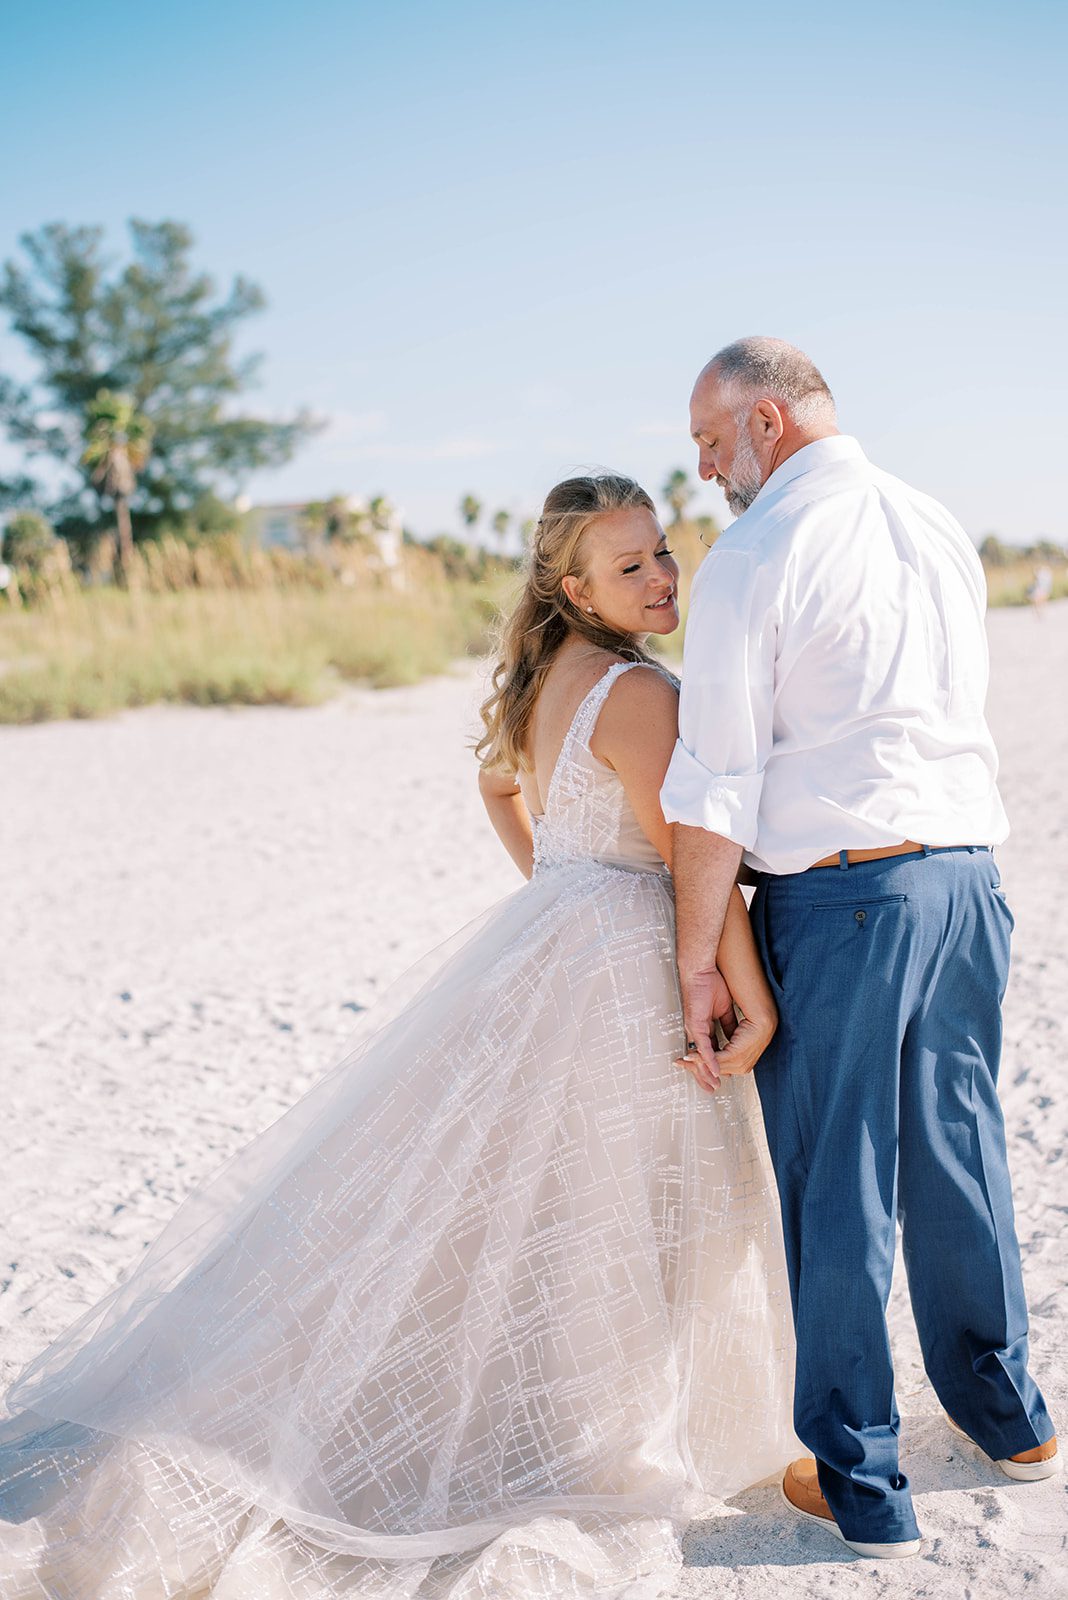 bride holding hands with her groom on a beach in Florida as the couple faces away from the camera and the bride looks over her shoulder